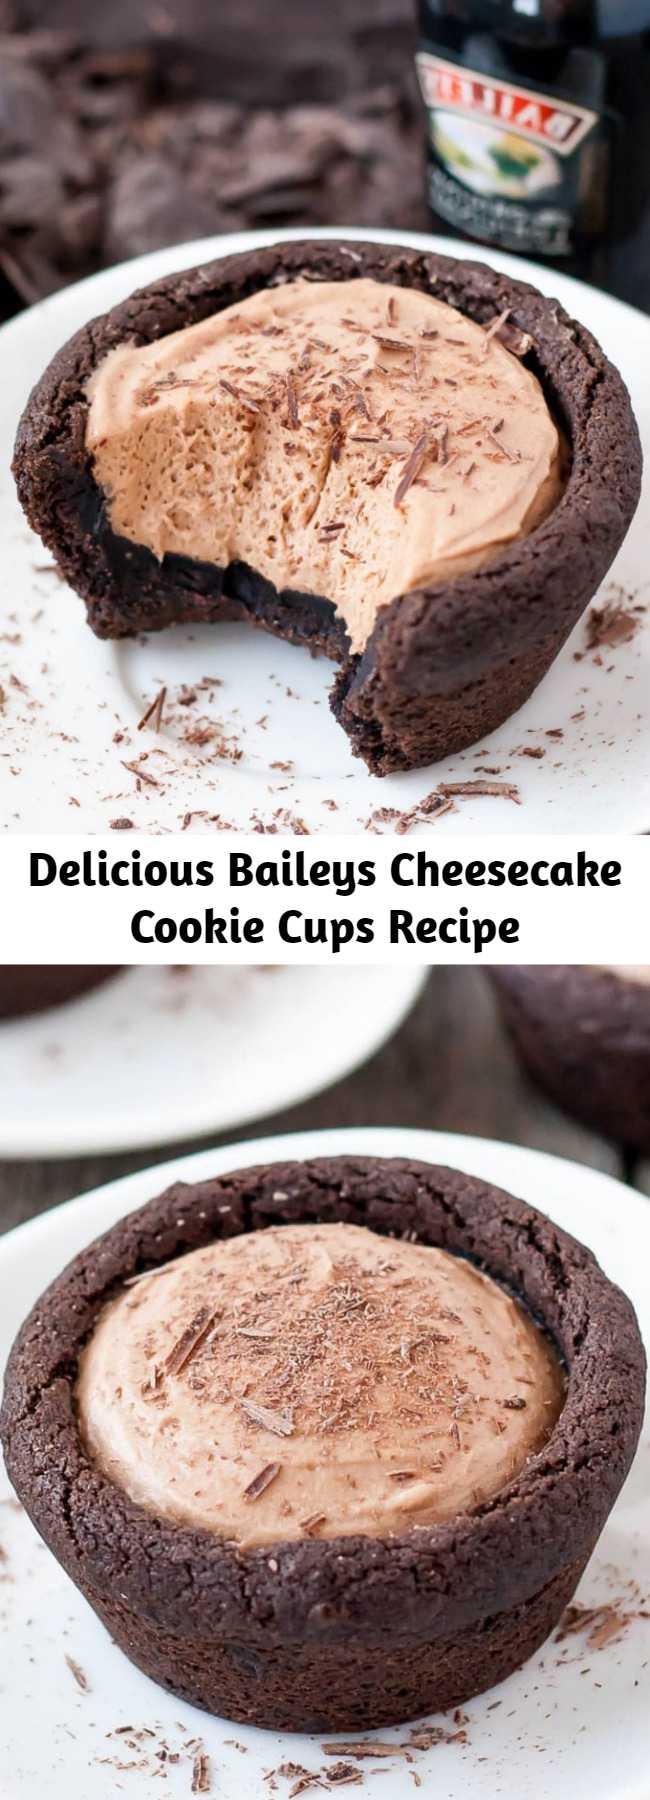 Delicious Baileys Cheesecake Cookie Cups Recipe - Chocolate cookie cups filled with a chocolate Baileys cheesecake. The perfect bite-sized indulgence!